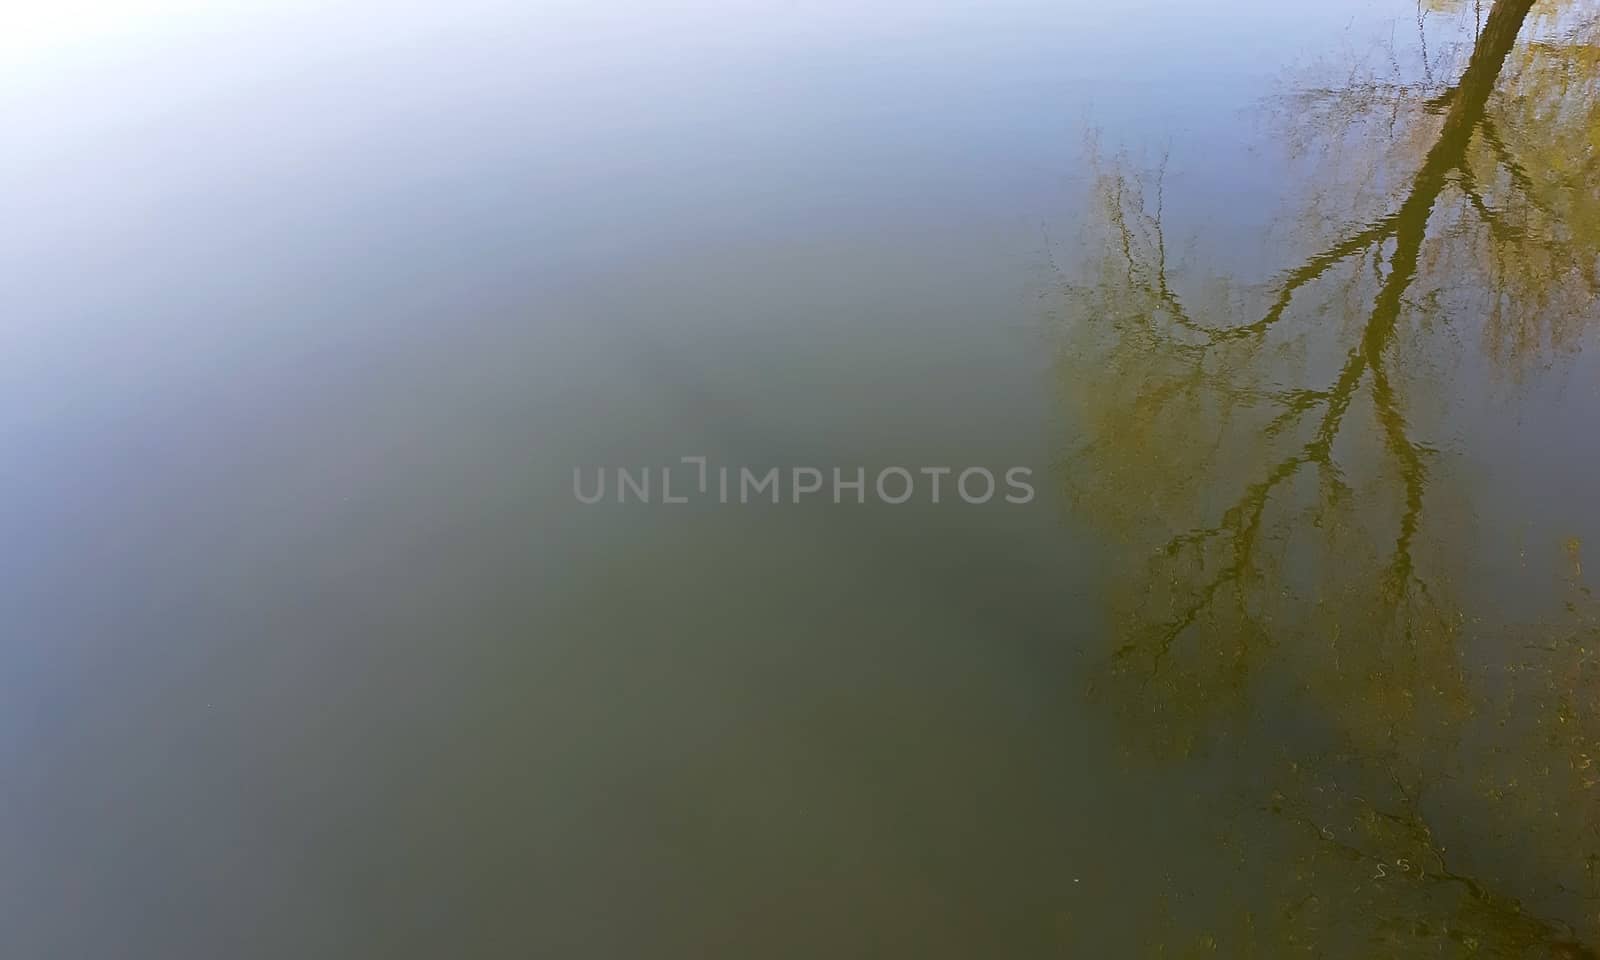 A willow tree reflects in the lake.